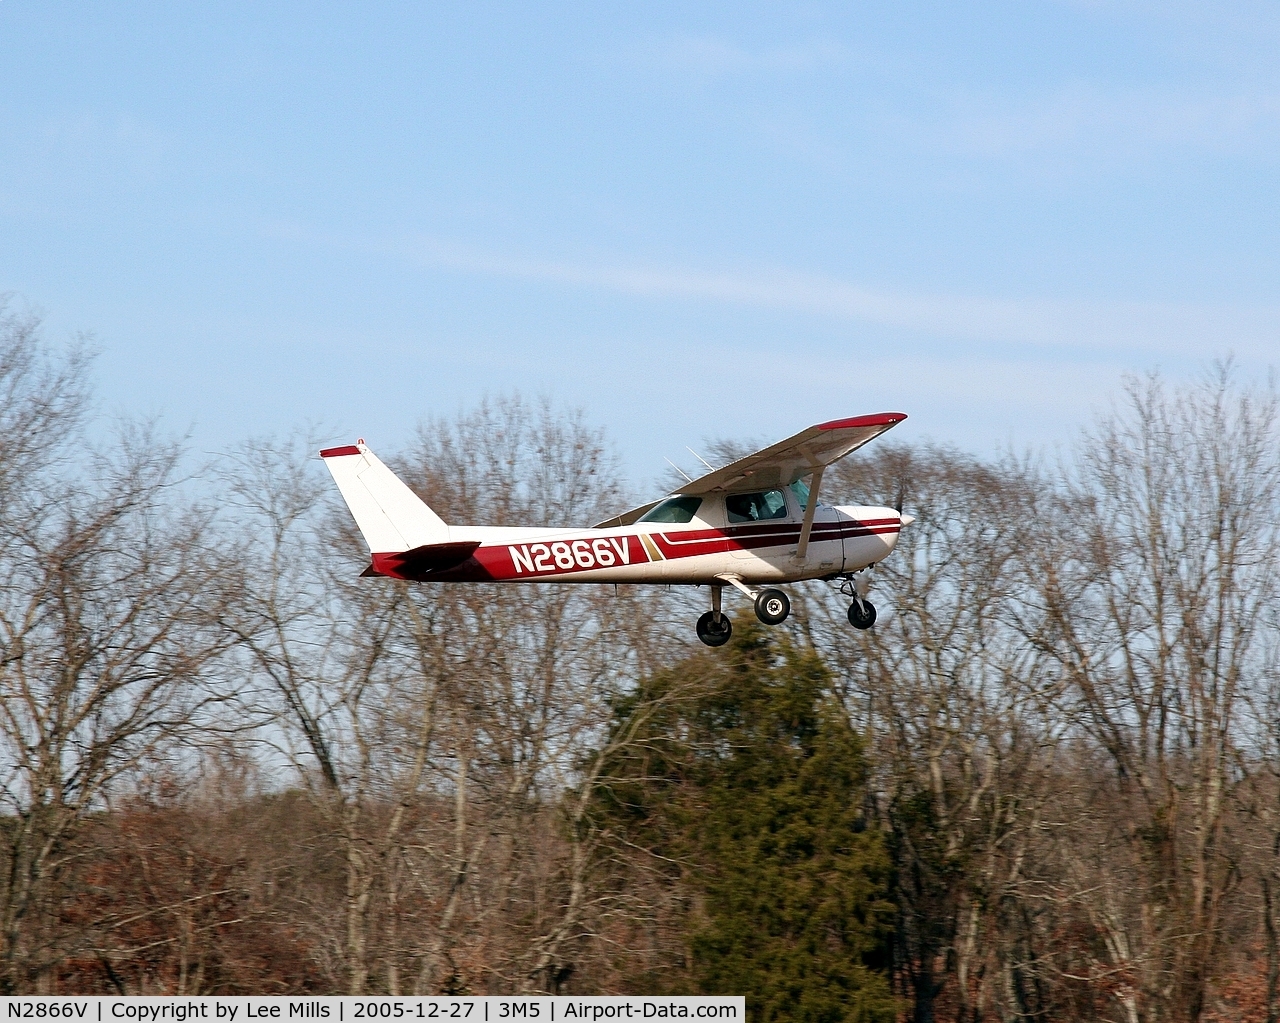 N2866V, 1974 Cessna 150M C/N 15076304, Practicing in the pattern at Moontown